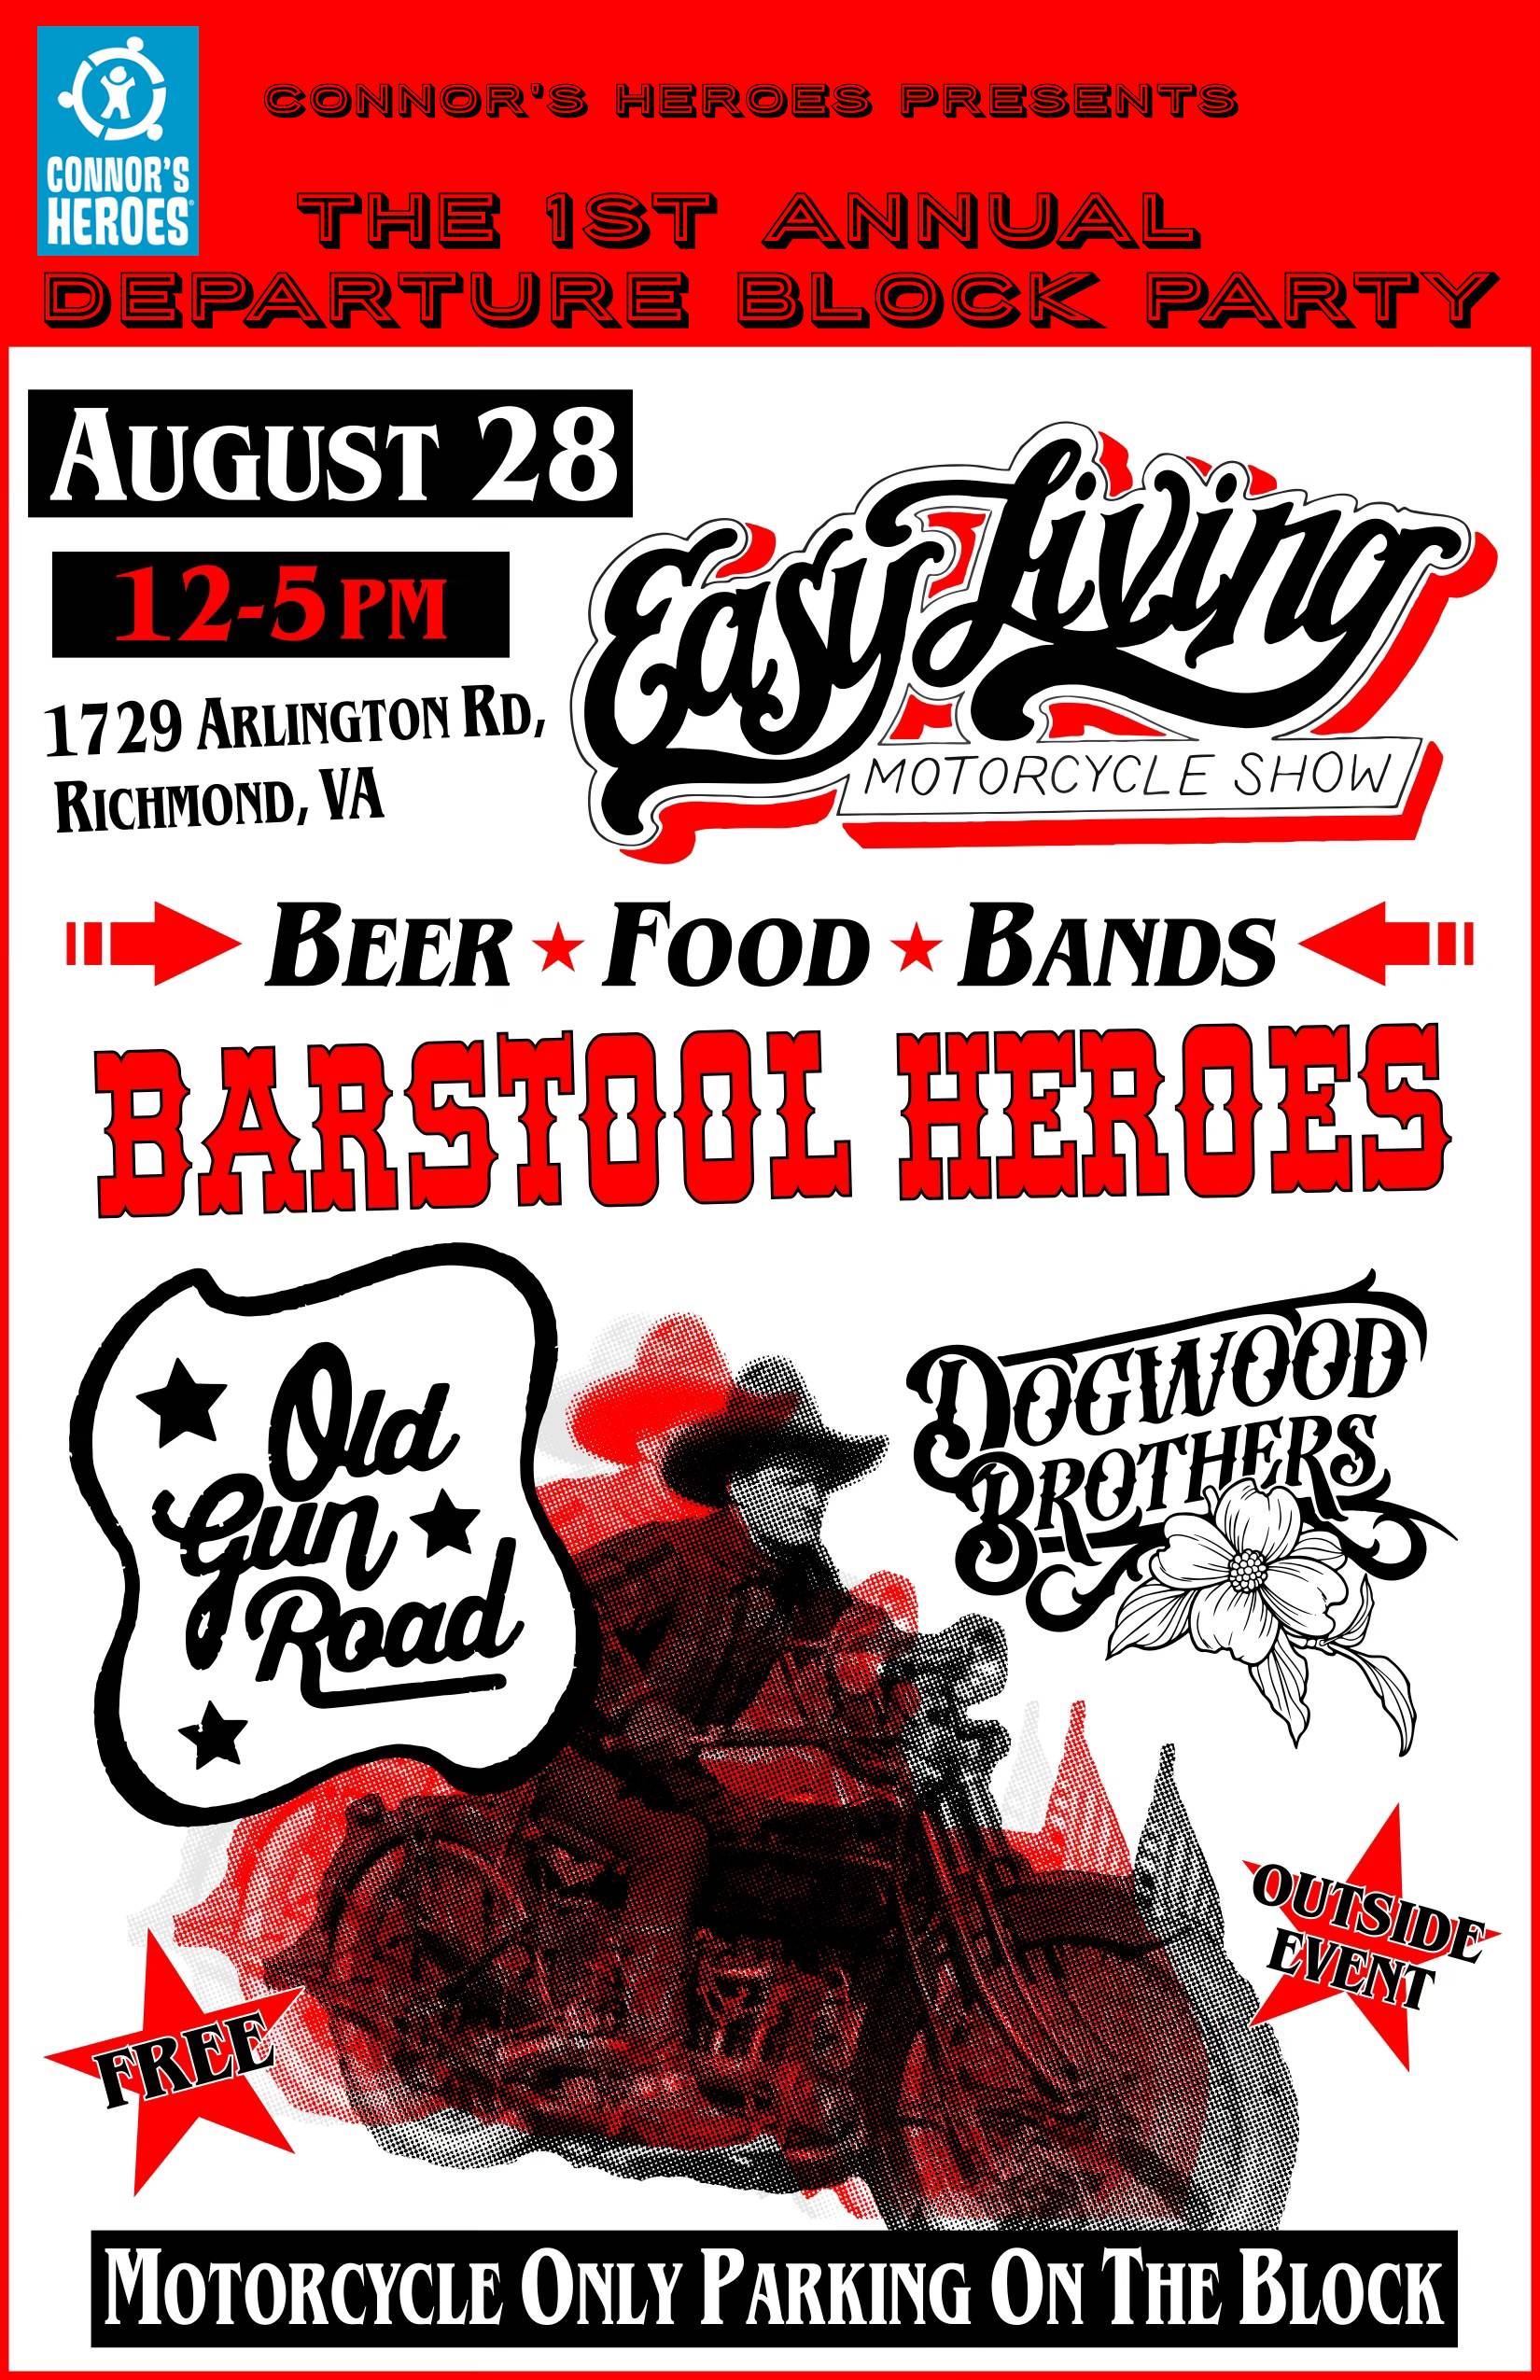 Poster for a motorcycle show Image of a cowboy on a motorcycle Text The first annual departure block party August 28 from 1 to 5 p.m.